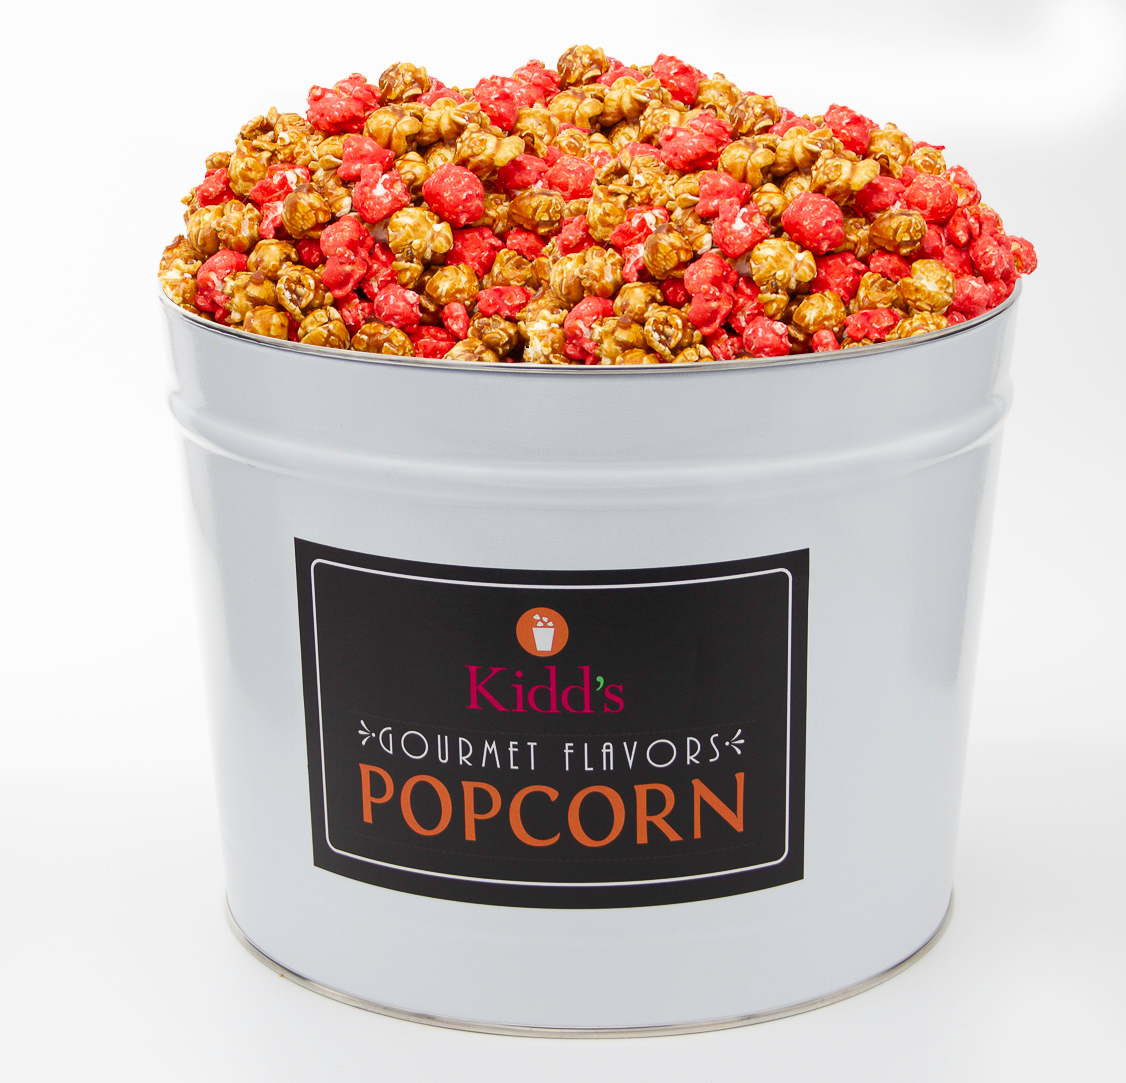 Signature White and Black 2 gallon Popcorn tin filled with RedHots Cinnamon and  tasty caramel popcorn. Buy during our Holiday sale for half off